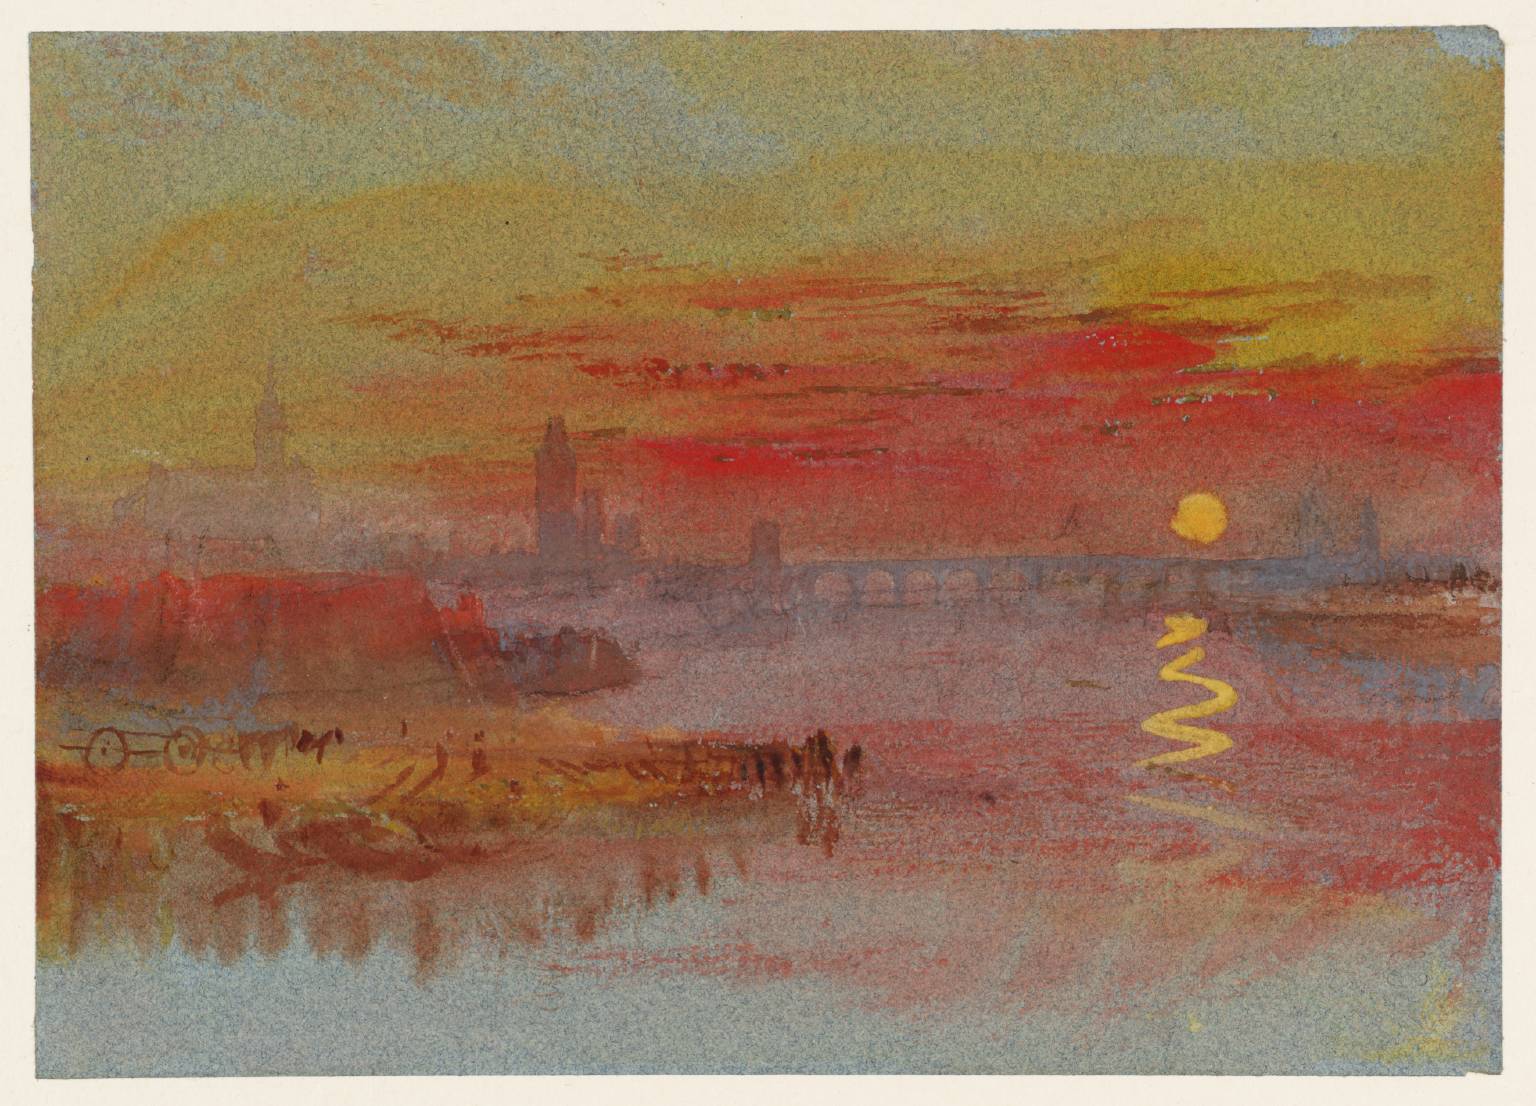 Painting of sunset by artist JMW Turner